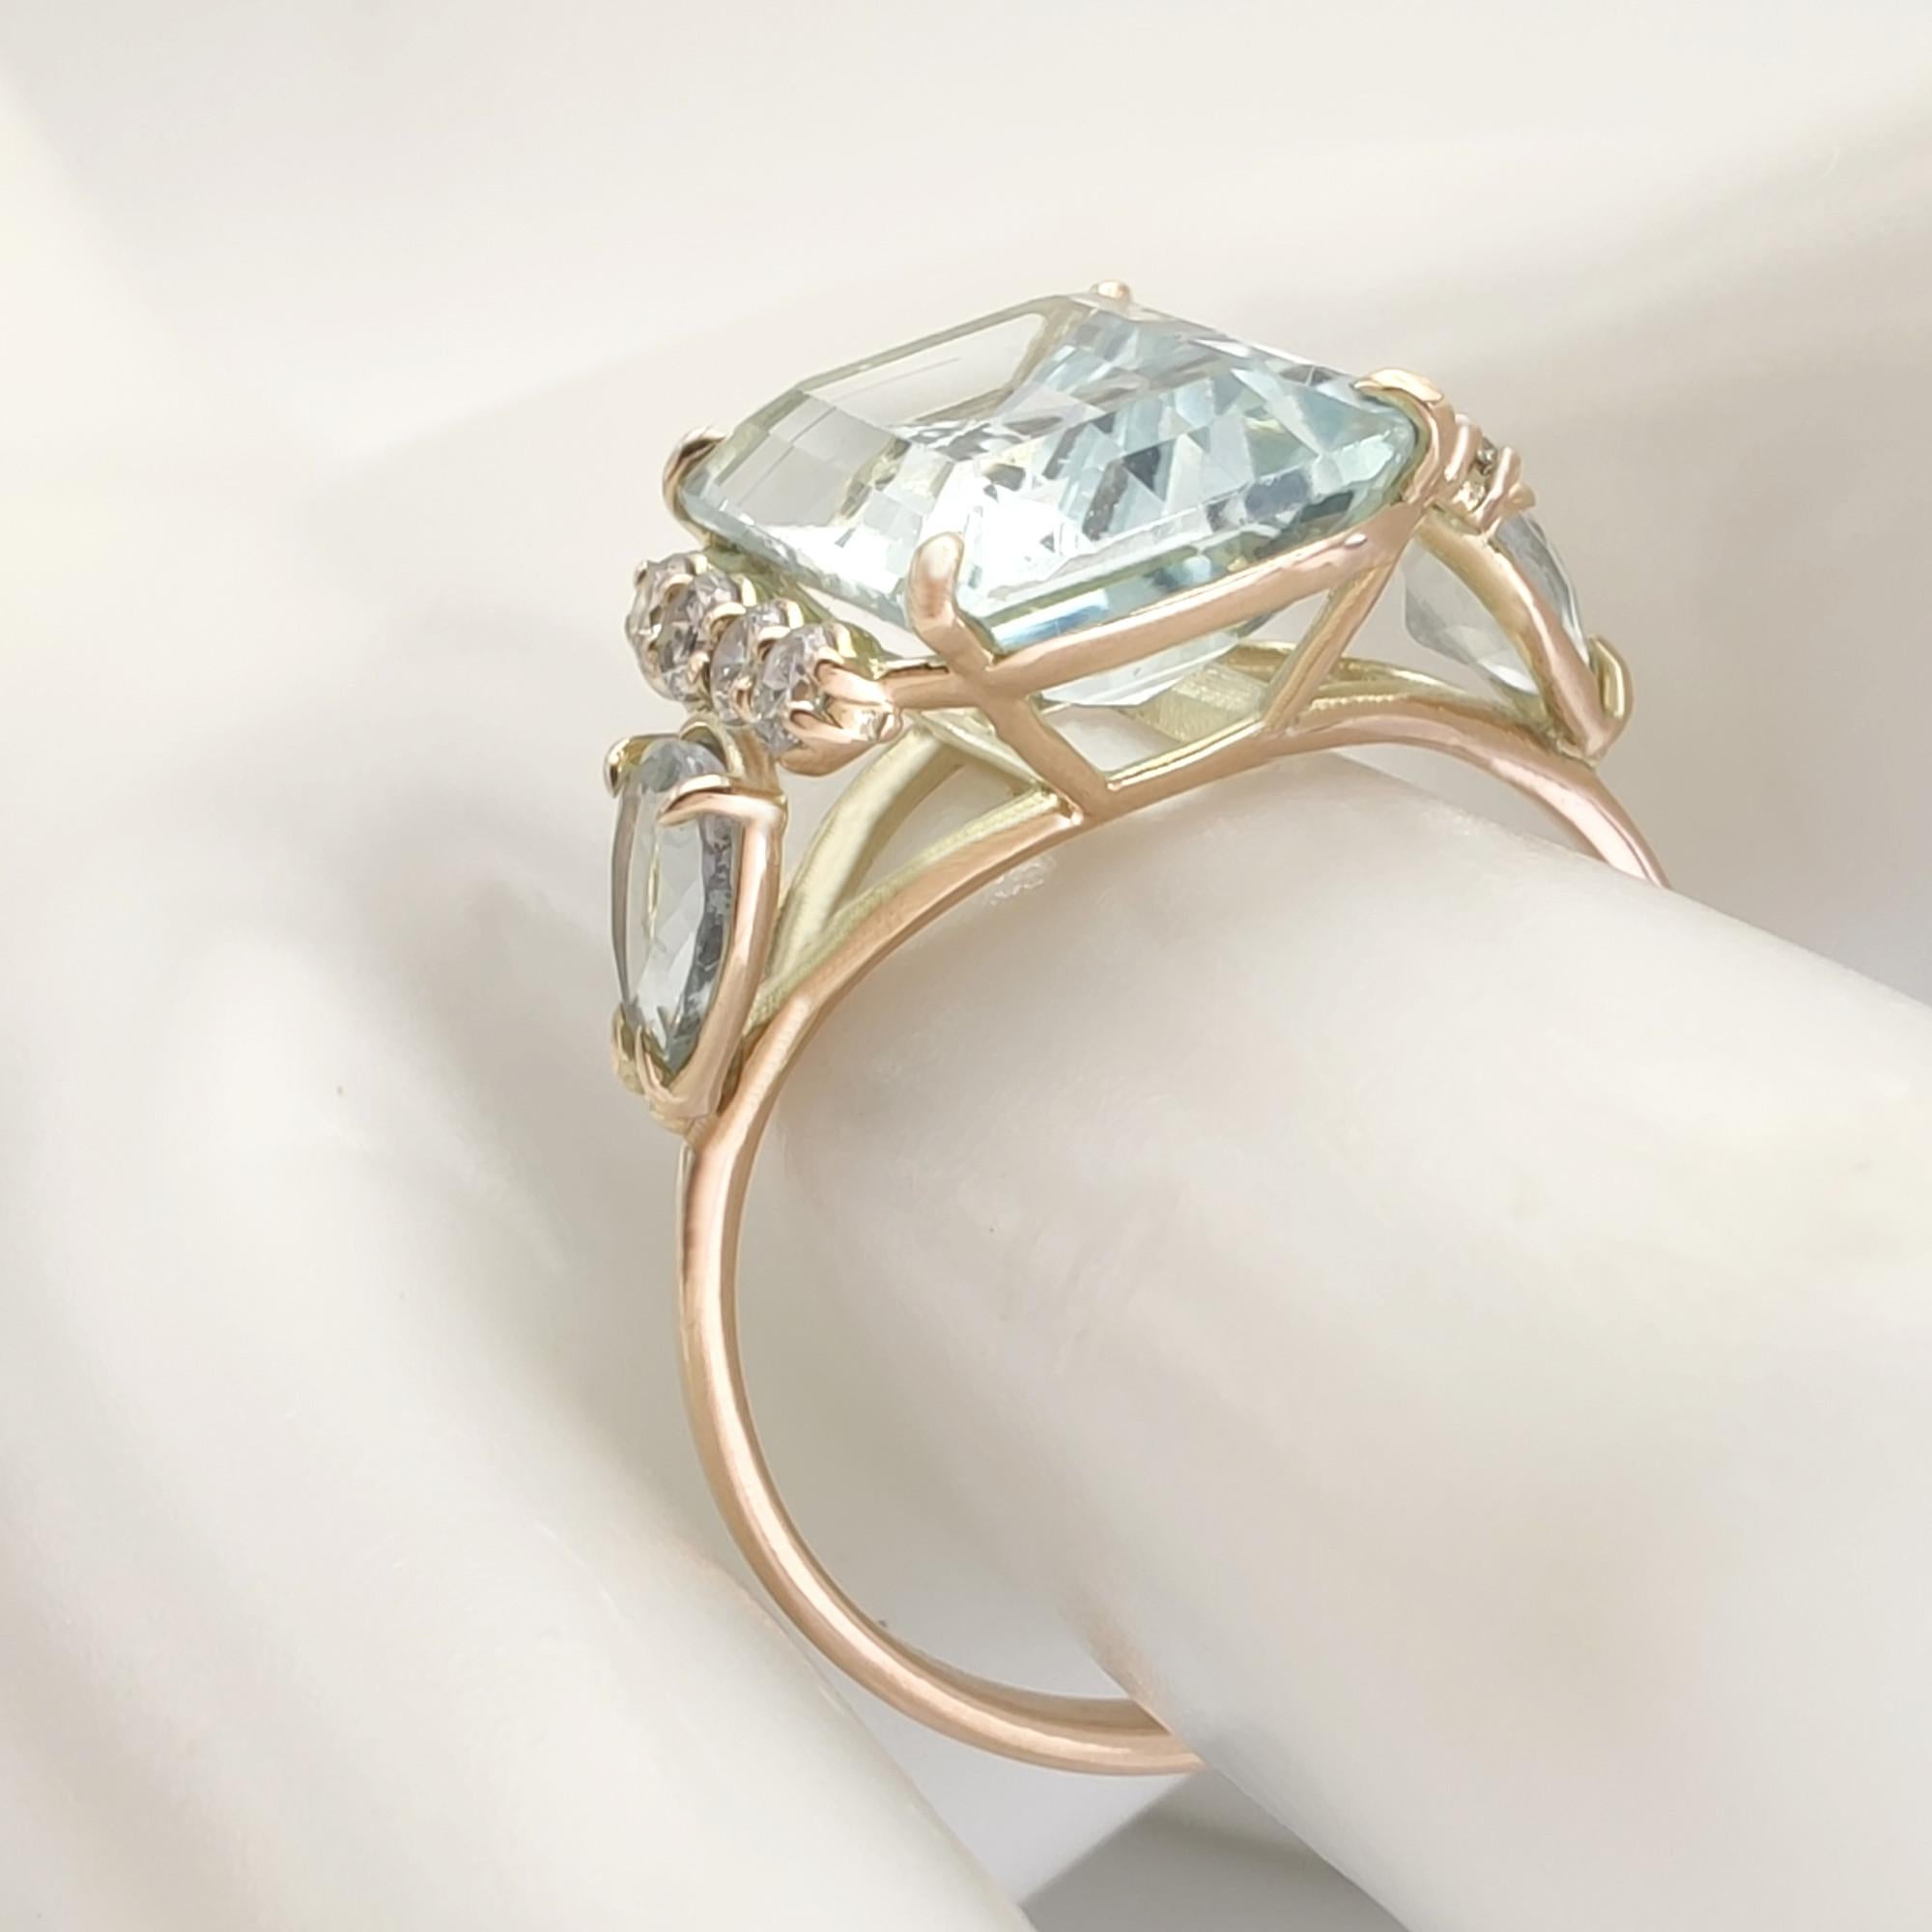 Emerald Cut Women's 14K Gold Ring Aquamarine and Diamonds Perfect for Proposals Engagements